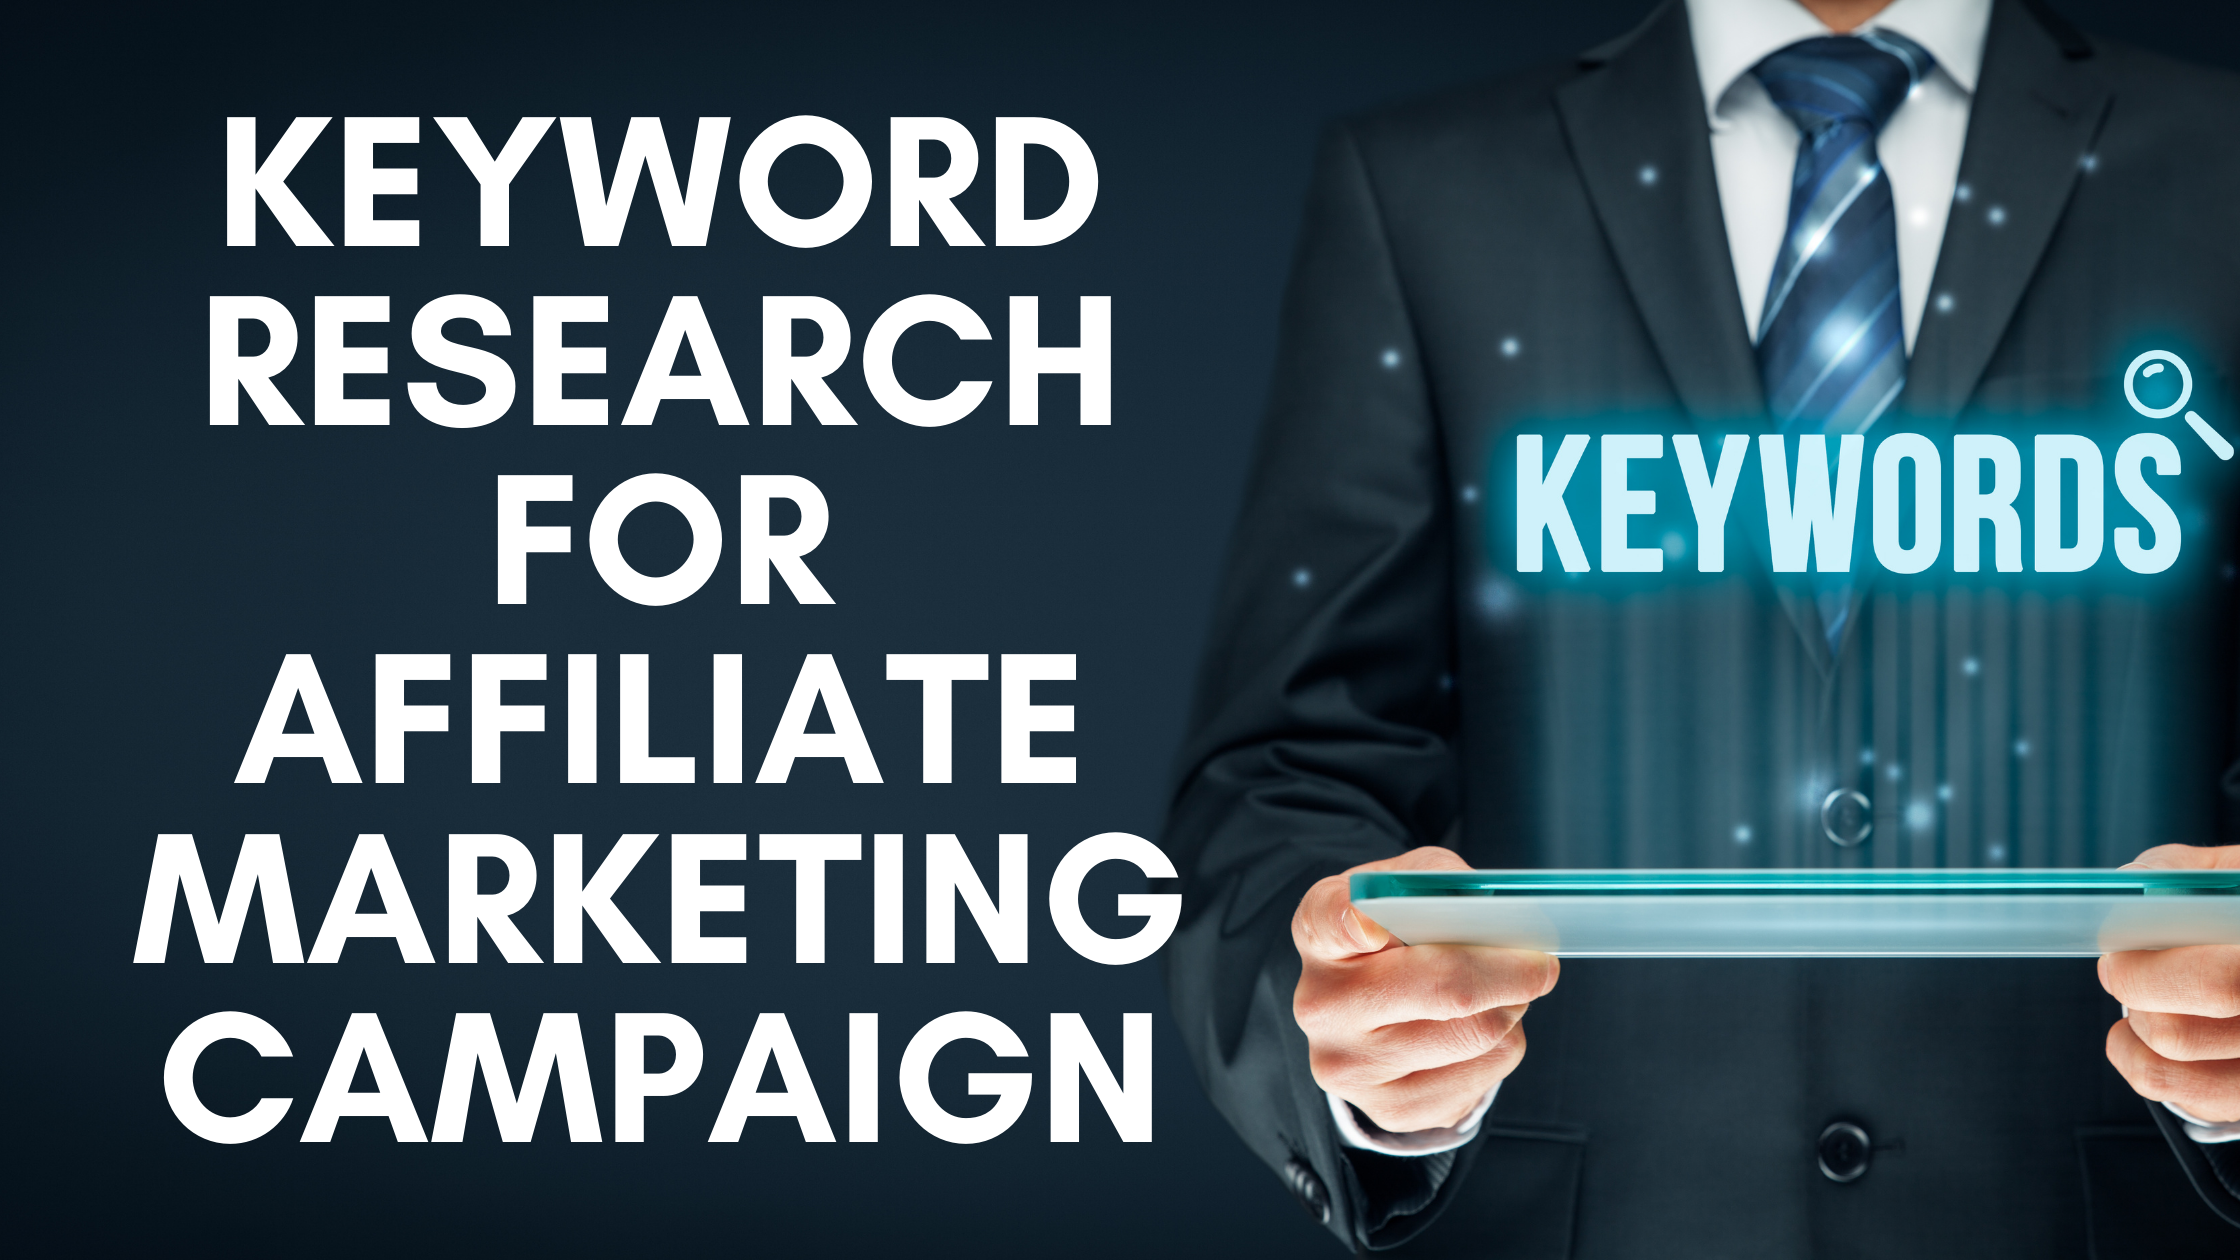 Keyword Research for Affiliate Marketing